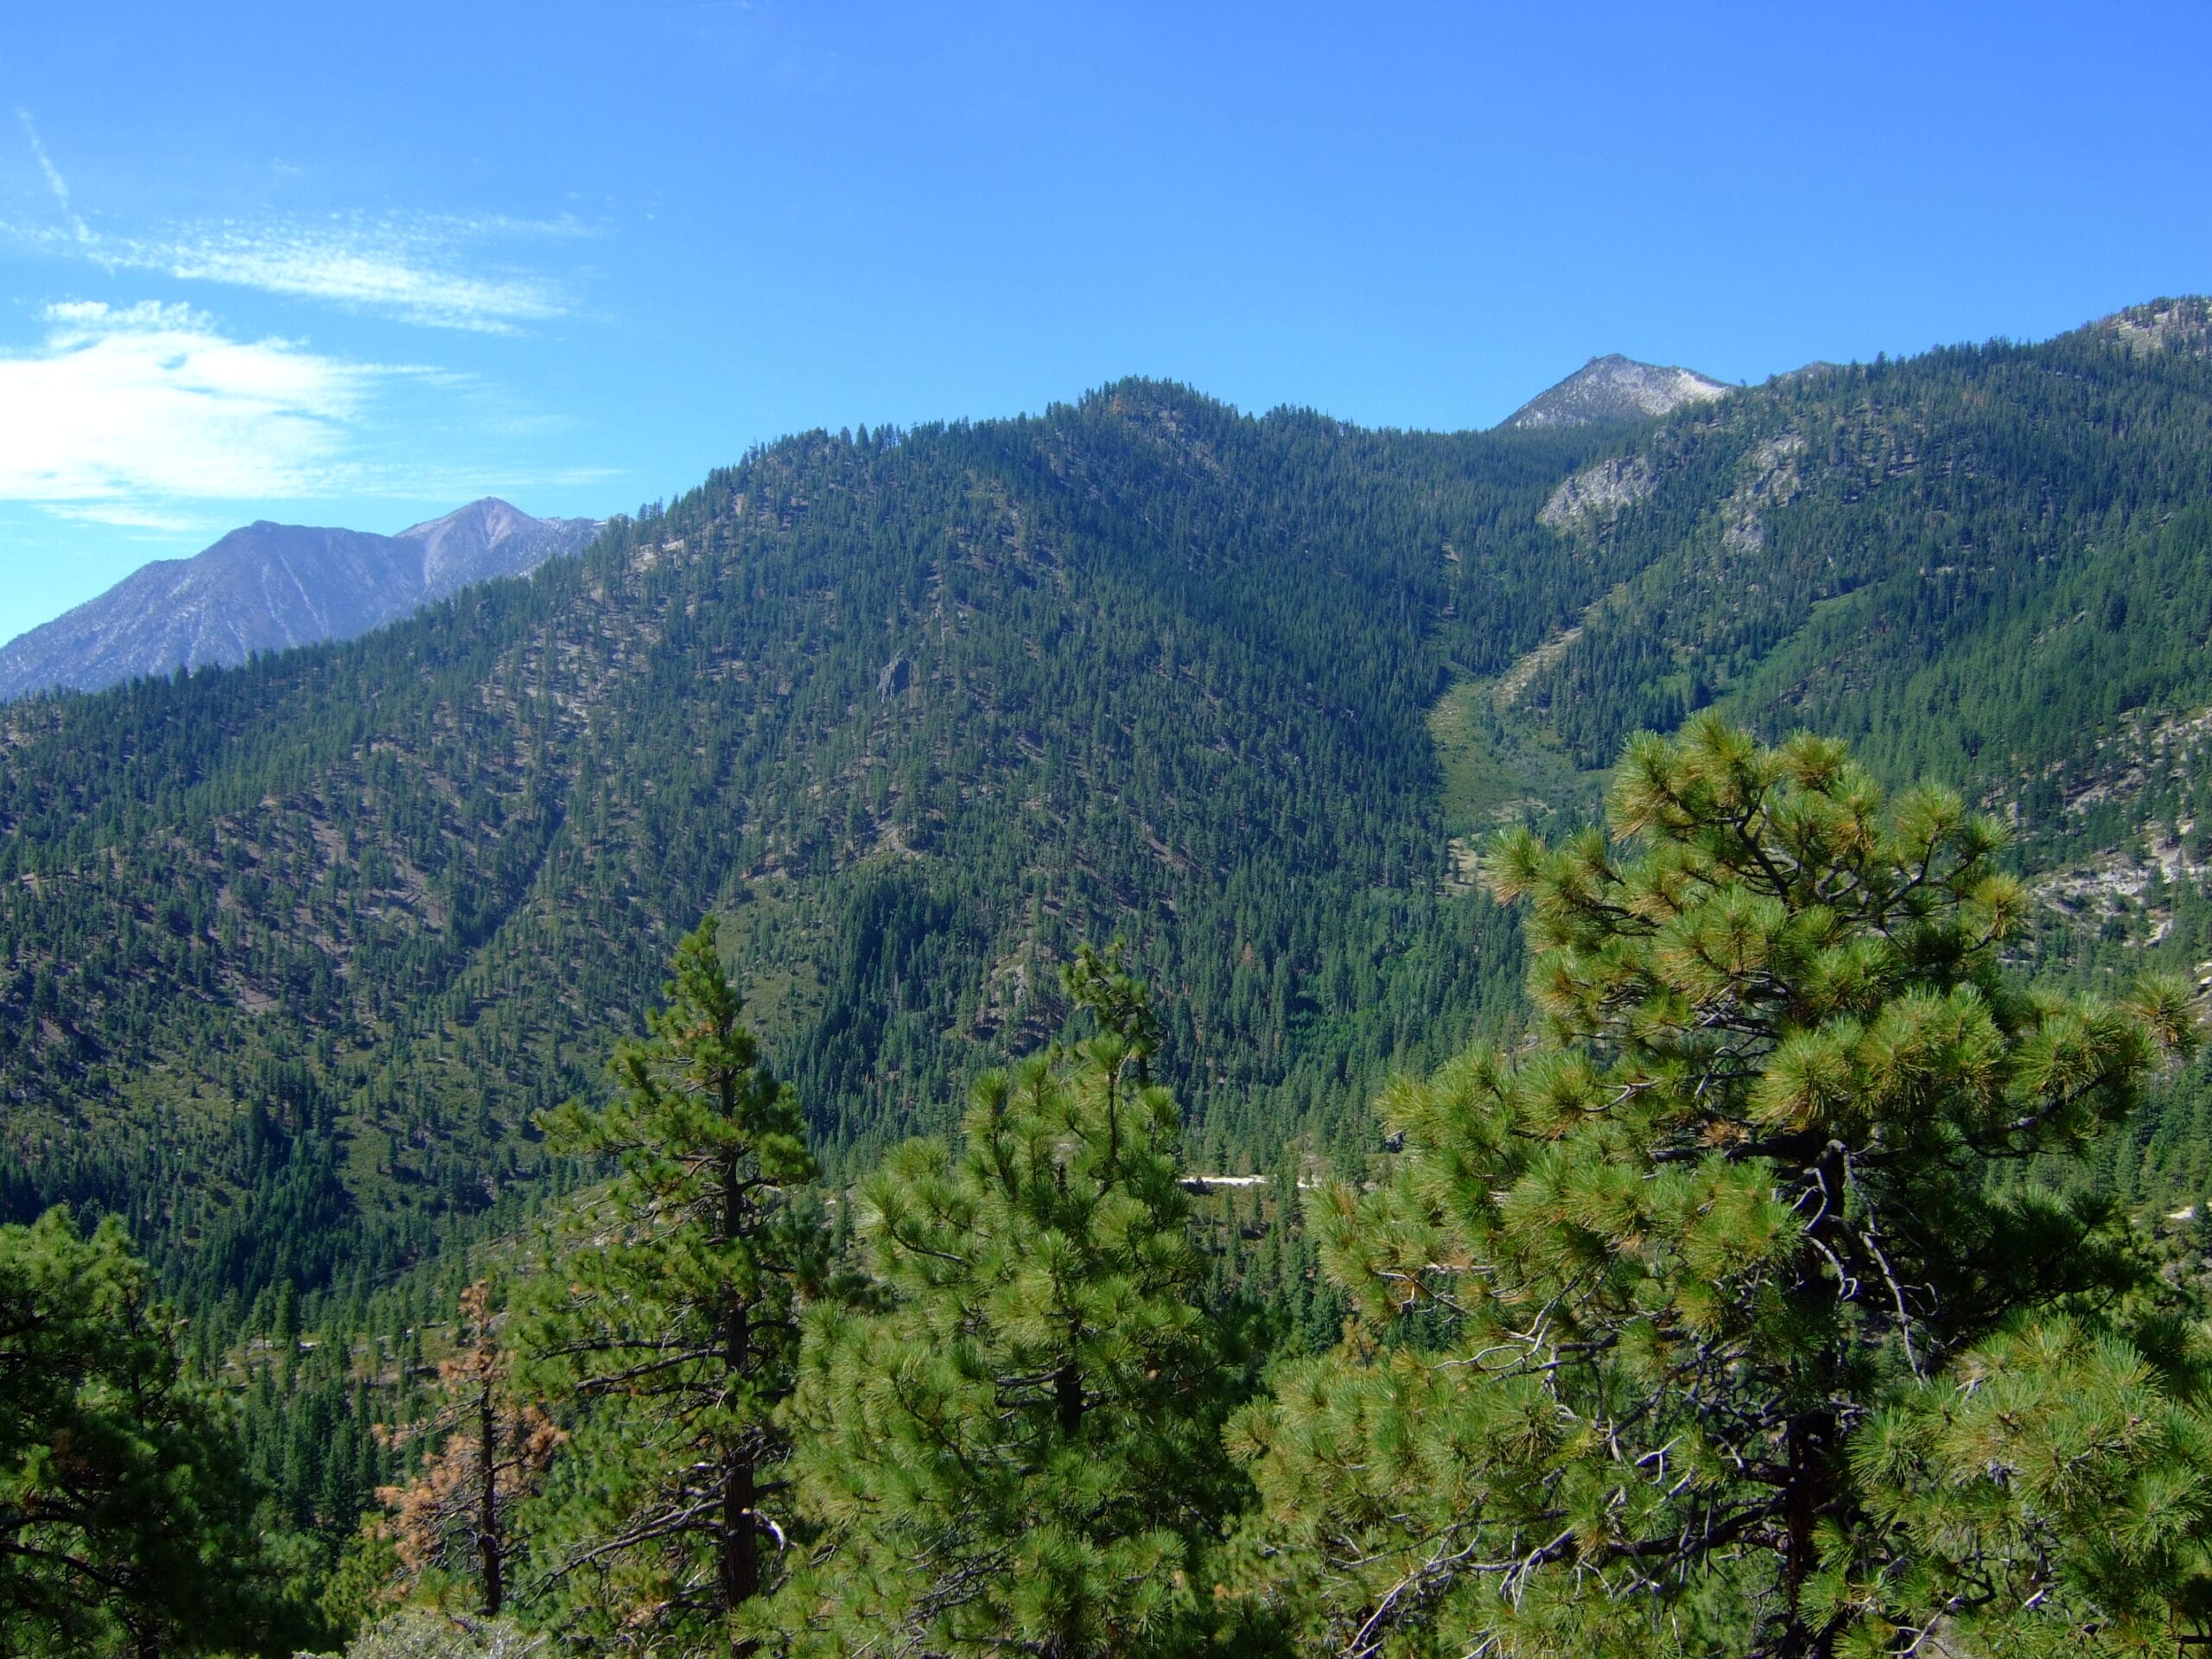 A mountain range with pine trees in the foreground.